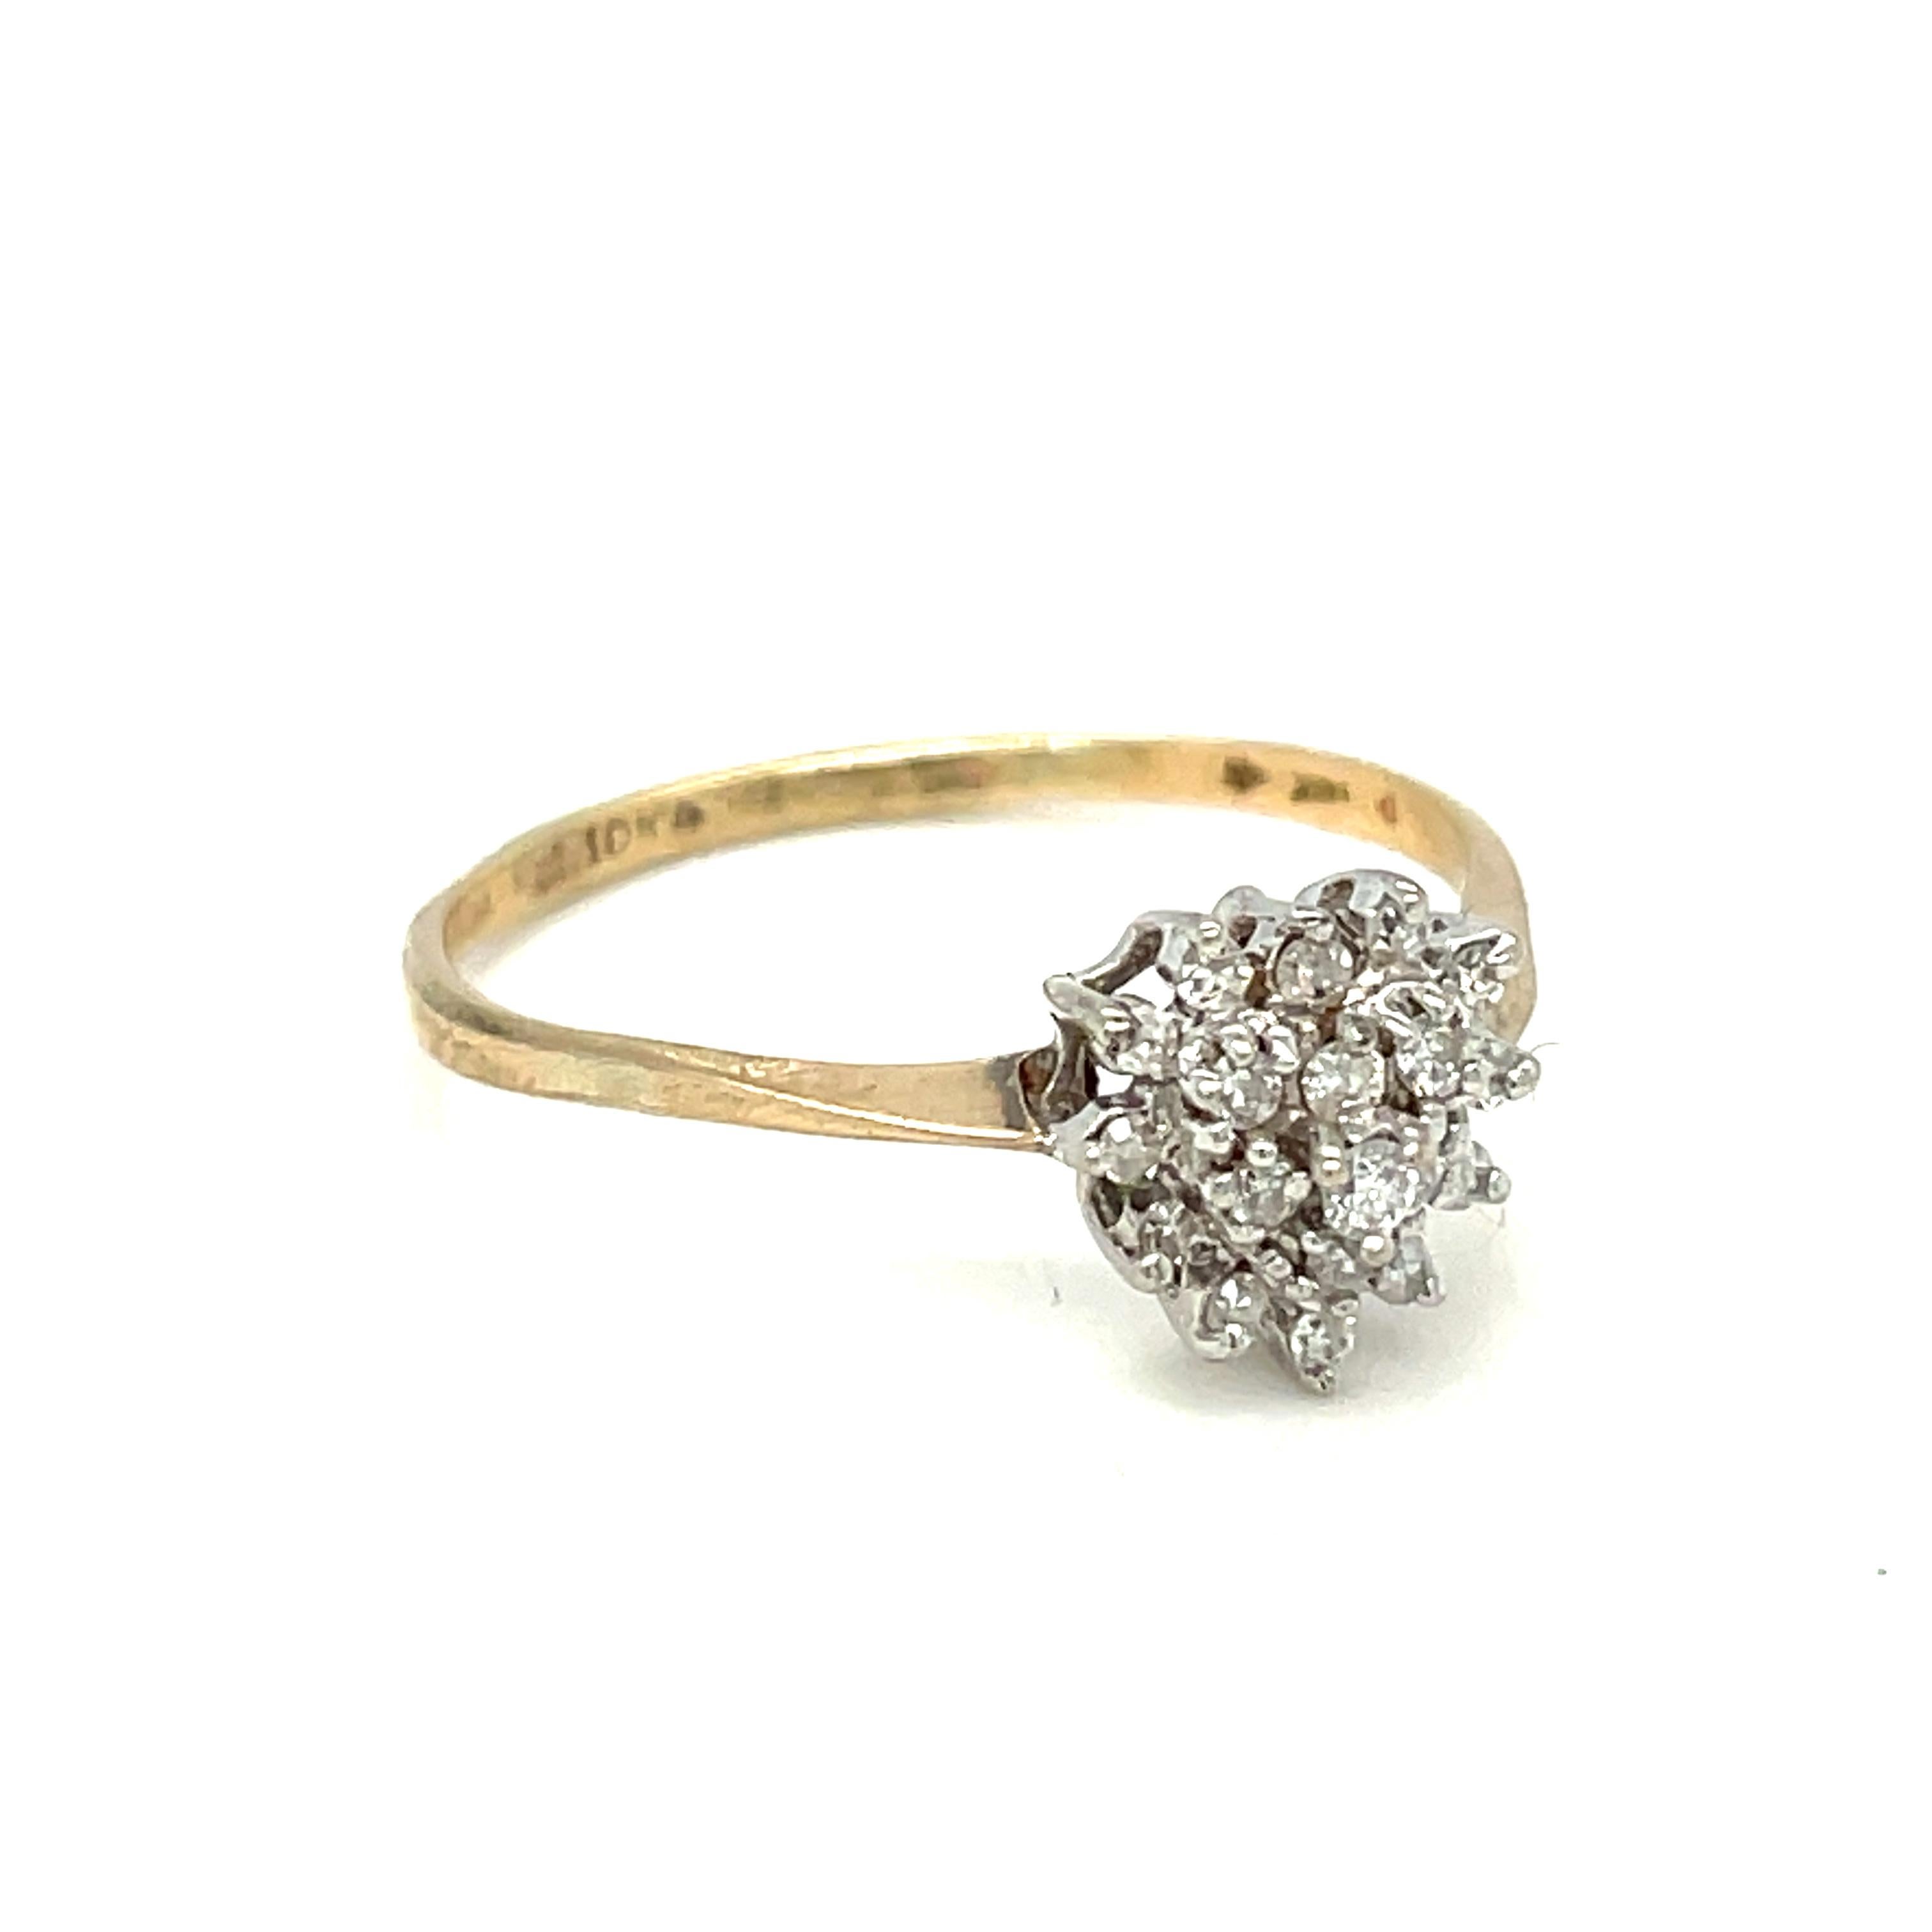 Beautiful vintage heart-shaped diamond cluster ring! Crafted from 10 karat solid yellow and white gold, the ring features a heart-shaped cluster of nineteen round brilliant cut diamonds set on three tiers in a lovely white gold basket setting. The